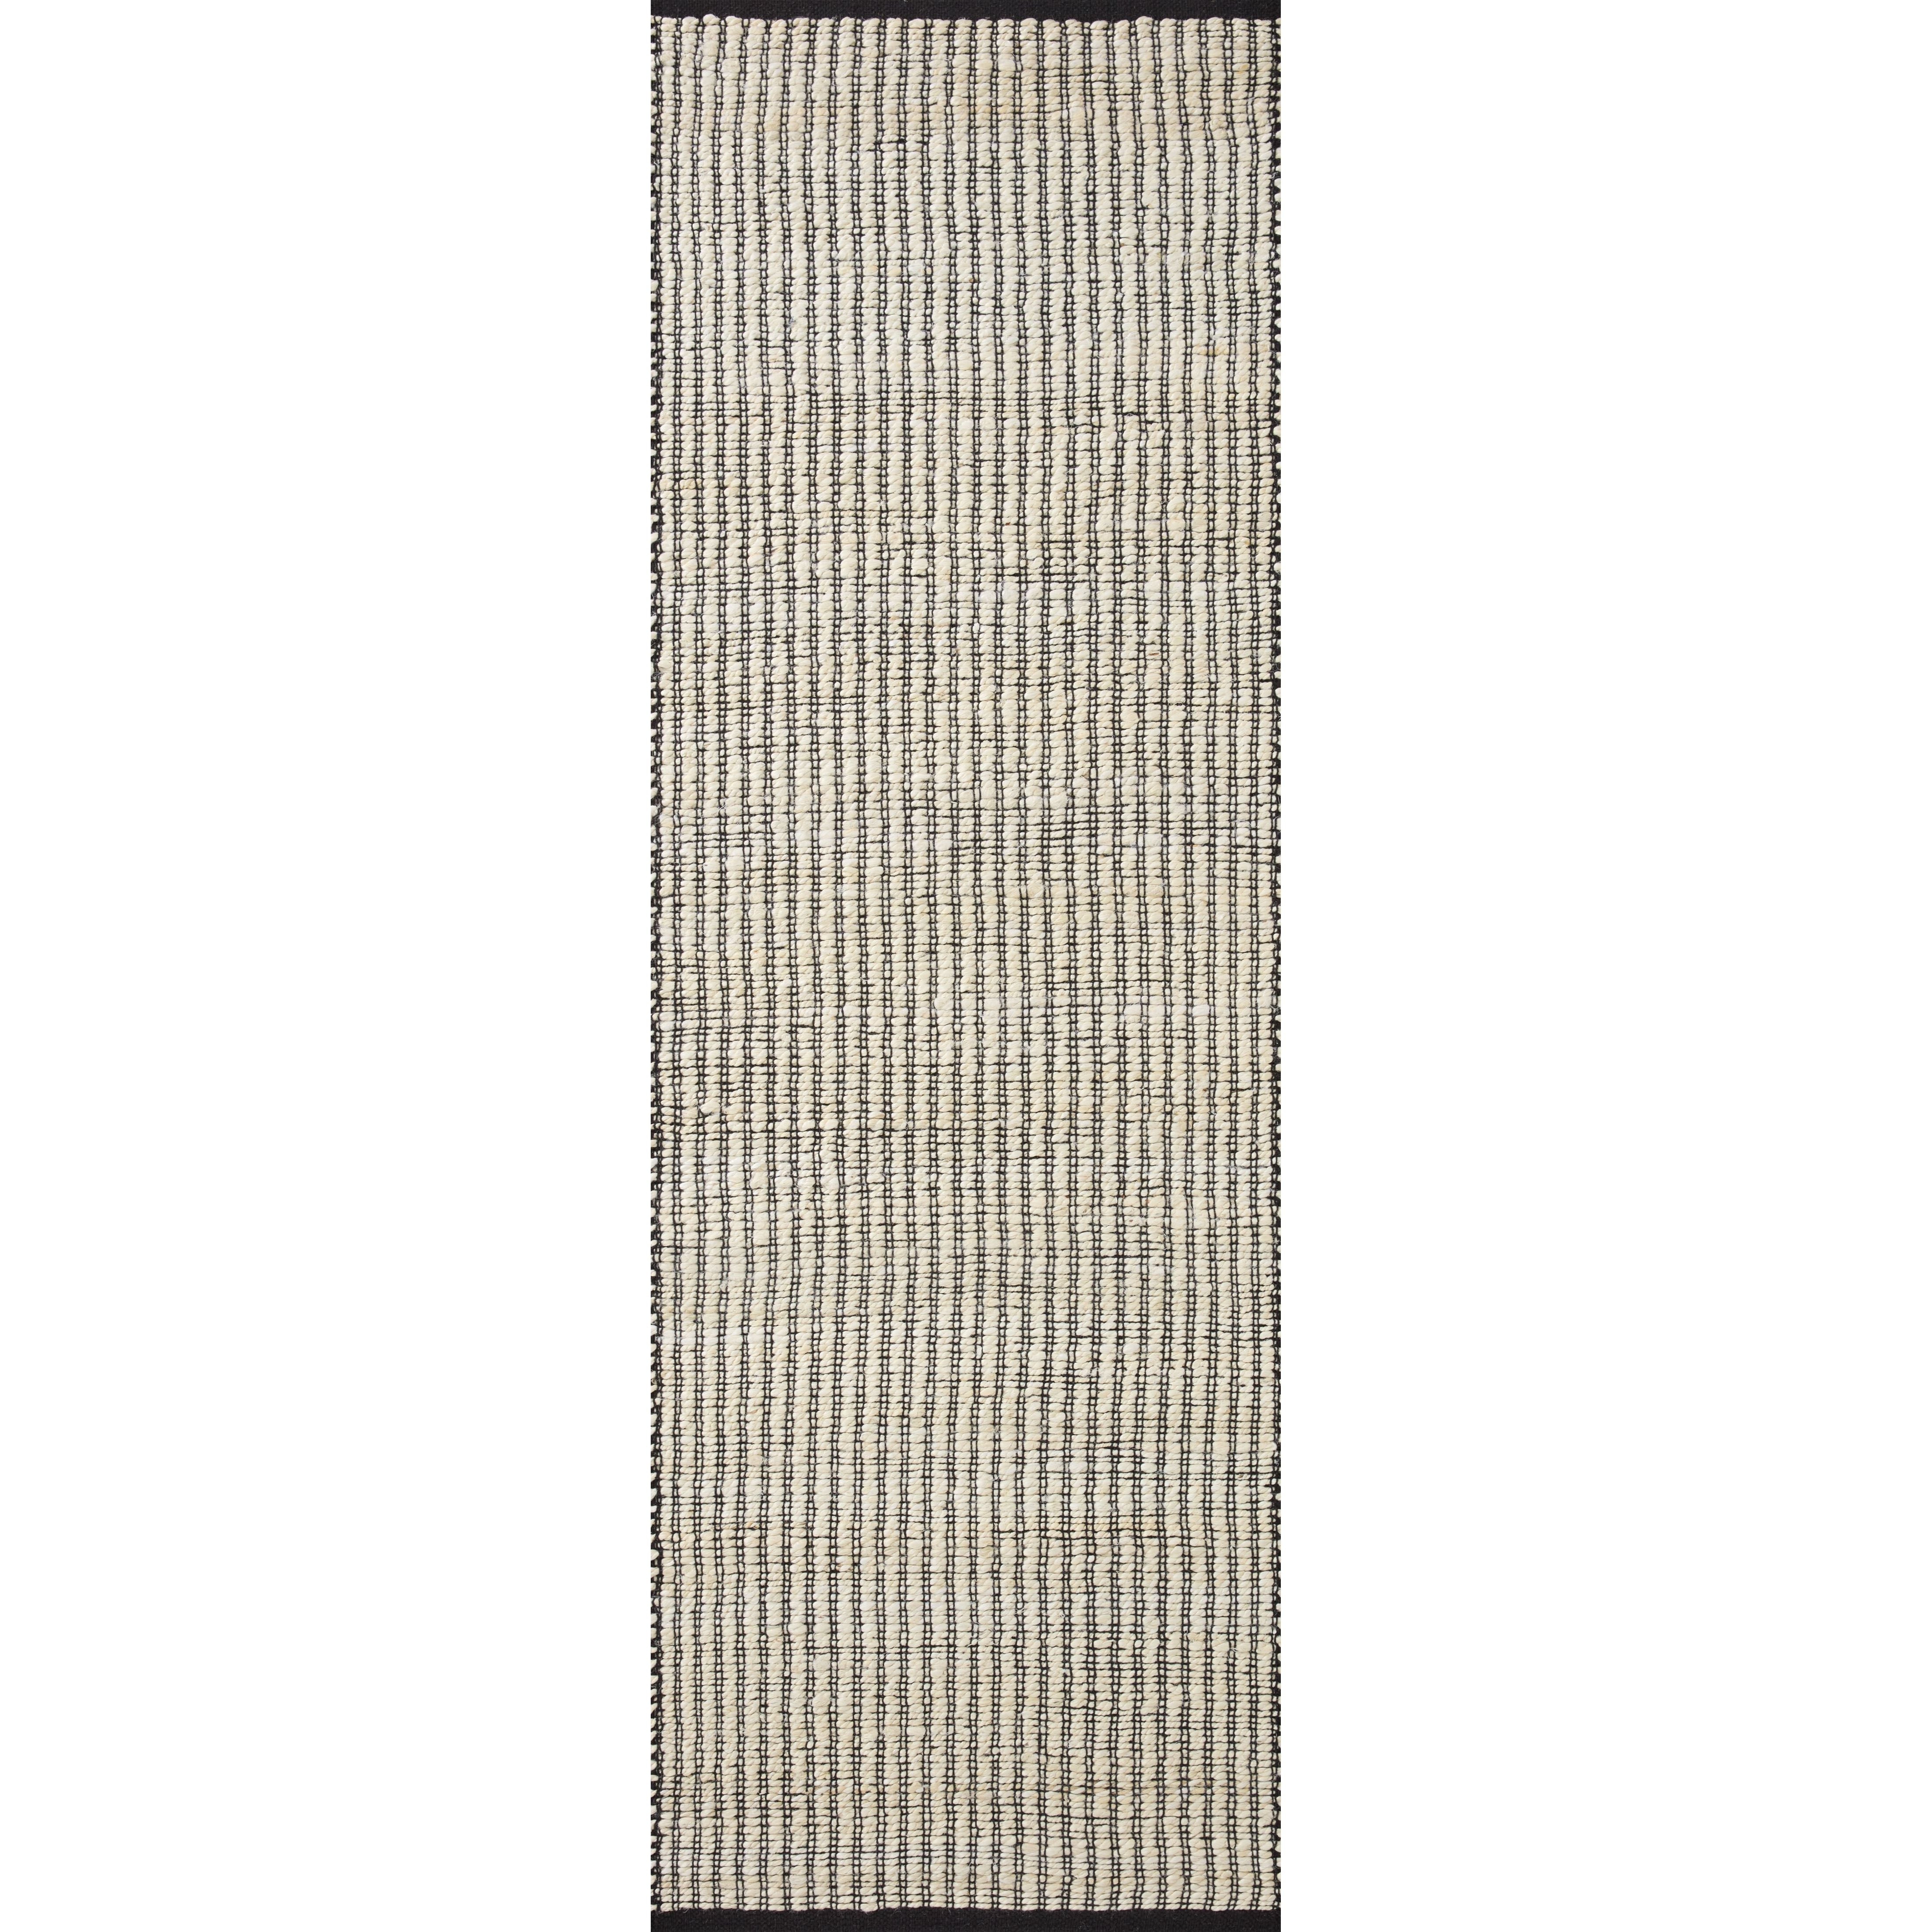 The Angela Rose x Loloi Colton CON-02 Ivory / Black rug is a new take on the staple jute rug, blended with cotton for added softness. In a range of linear designs in modern earth tones, Colton can add visual interest to a room or serve as a gently textured neutral. Amethyst favorite! Amethyst Home provides interior design services, furniture, rugs, and lighting in the Salt Lake City metro area.